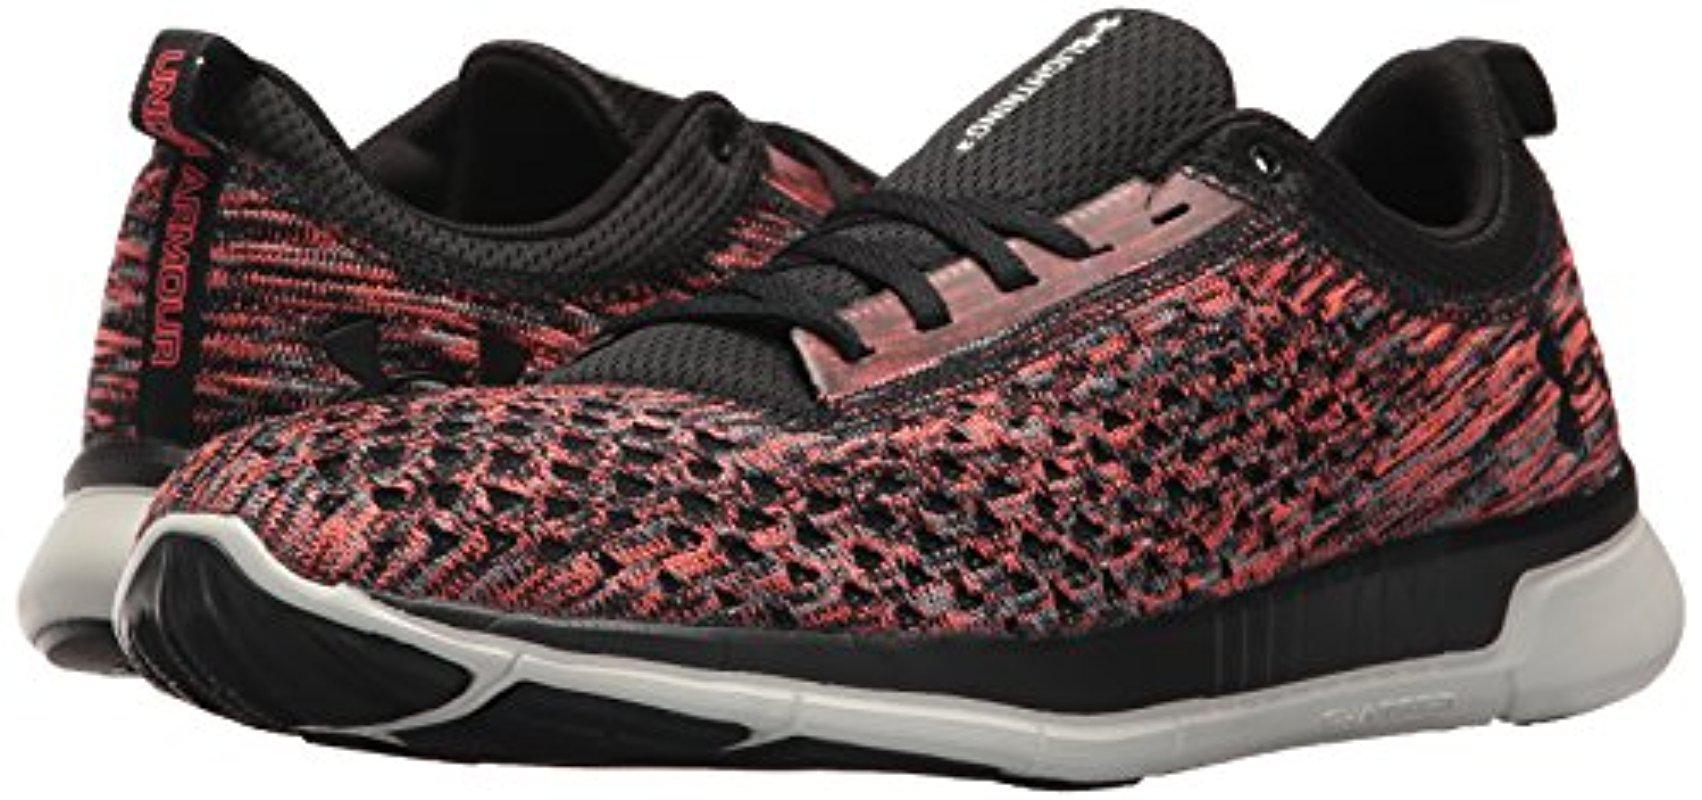 Under Armour Rubber Ua Lightning 2 Training Shoes in Neon Coral/Black/Black  (Black) for Men | Lyst